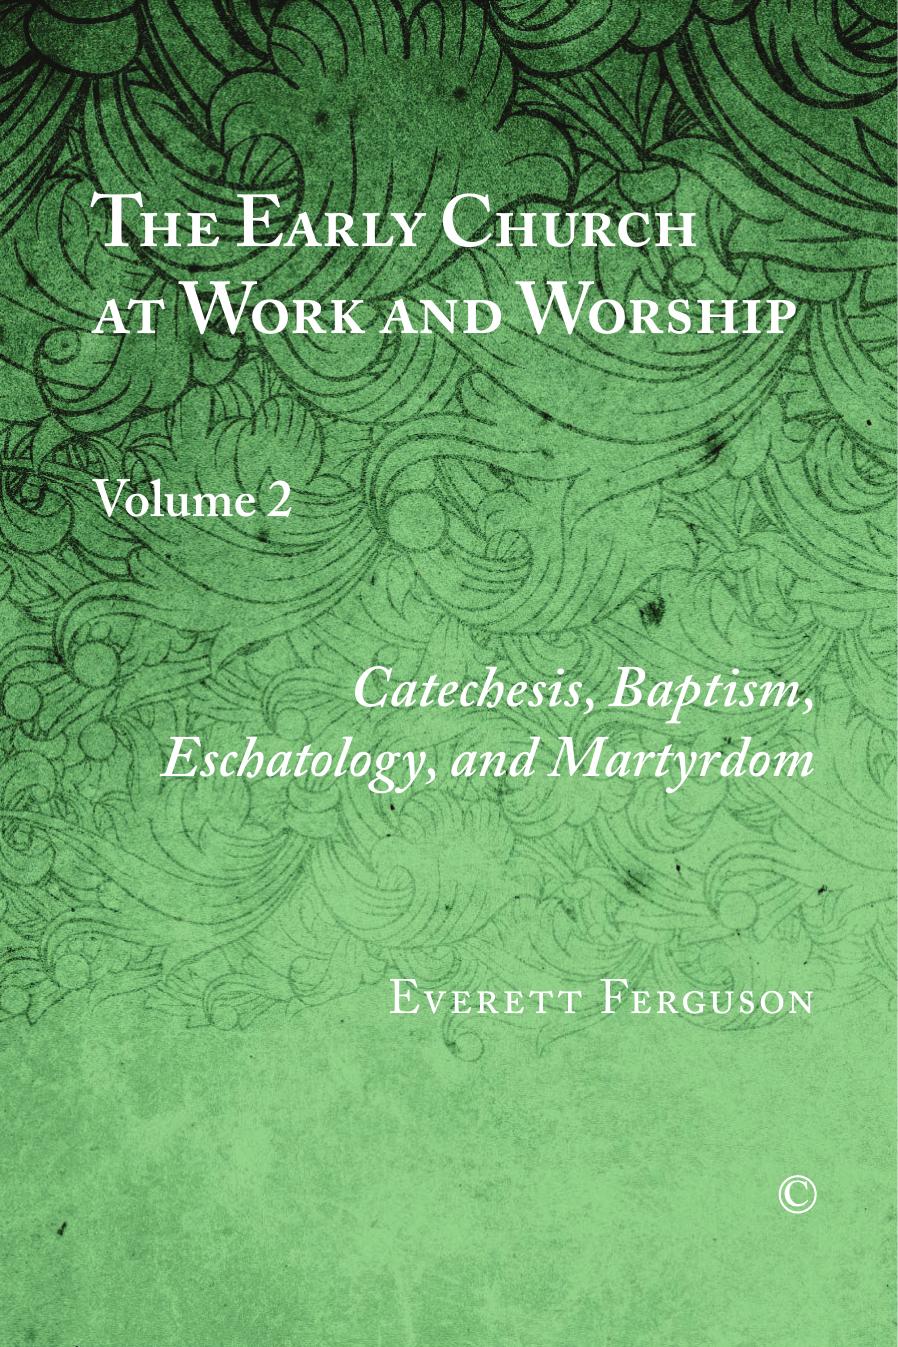 The Early Church at Work and Worship, Vol II: Volume 2: Catechesis, Baptism, Eschatology, and Martyrdom